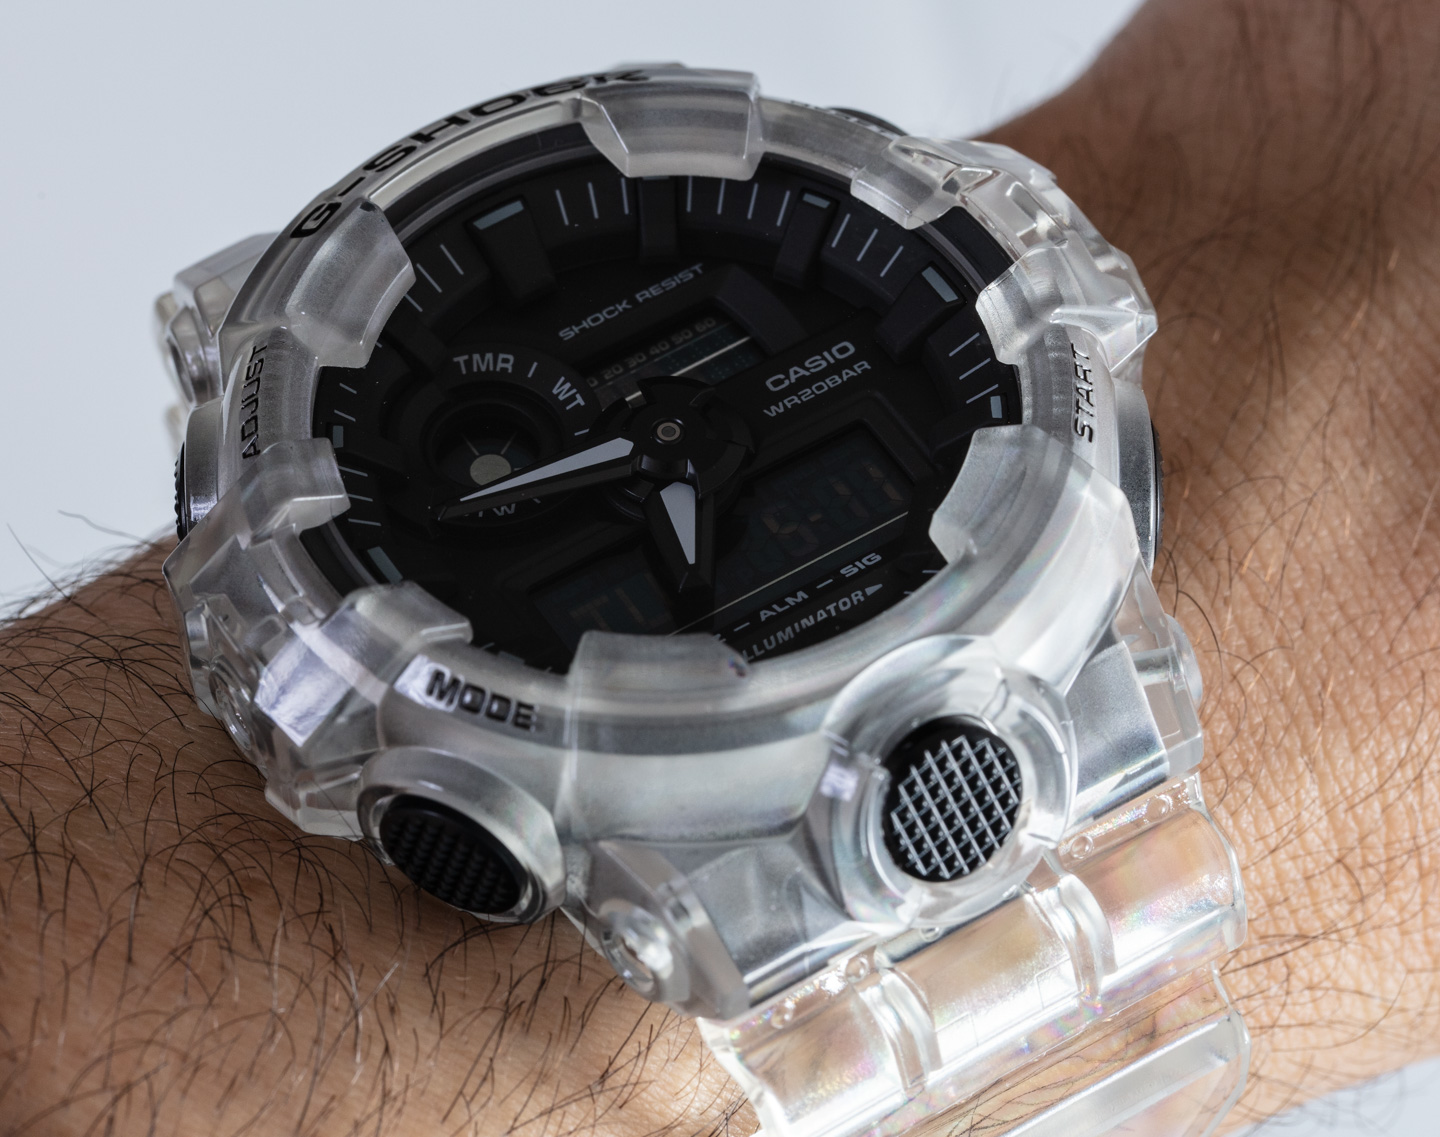 From The Casio G-Shock Transparent Pack: Value & Fun With The 